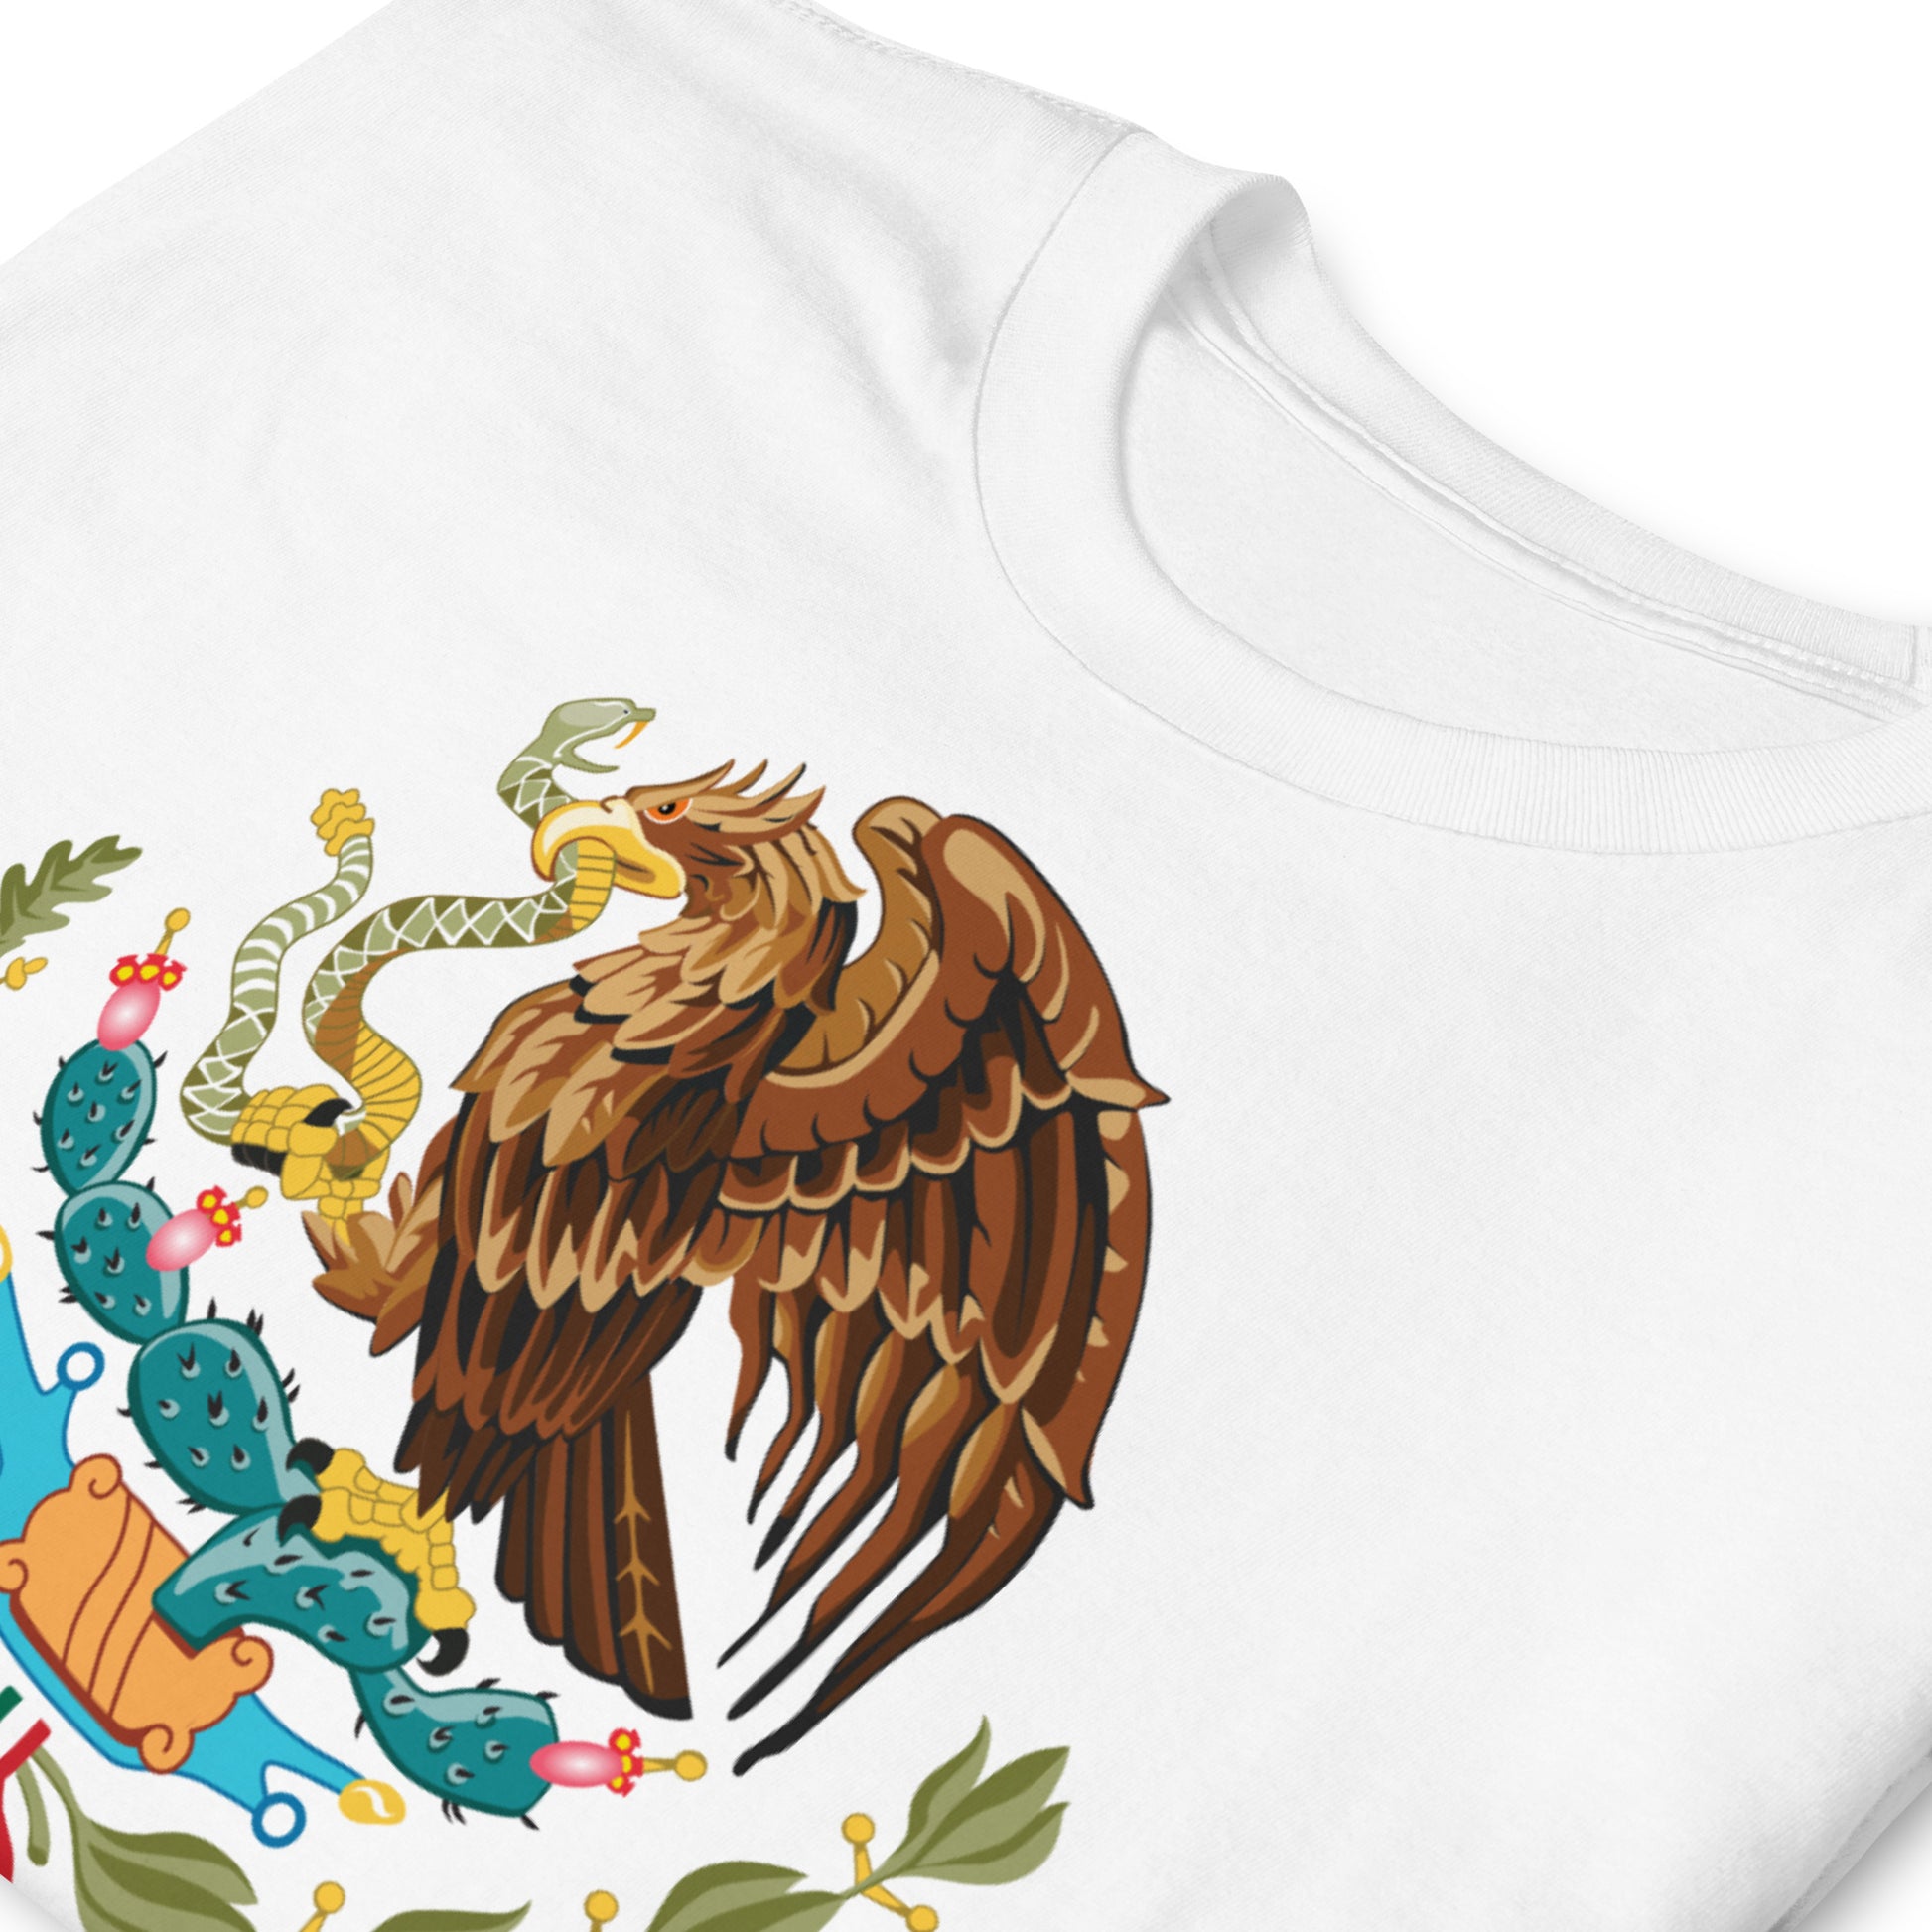 Mexico T-Shirt / Mexican Clothing Style / Mexico Lover